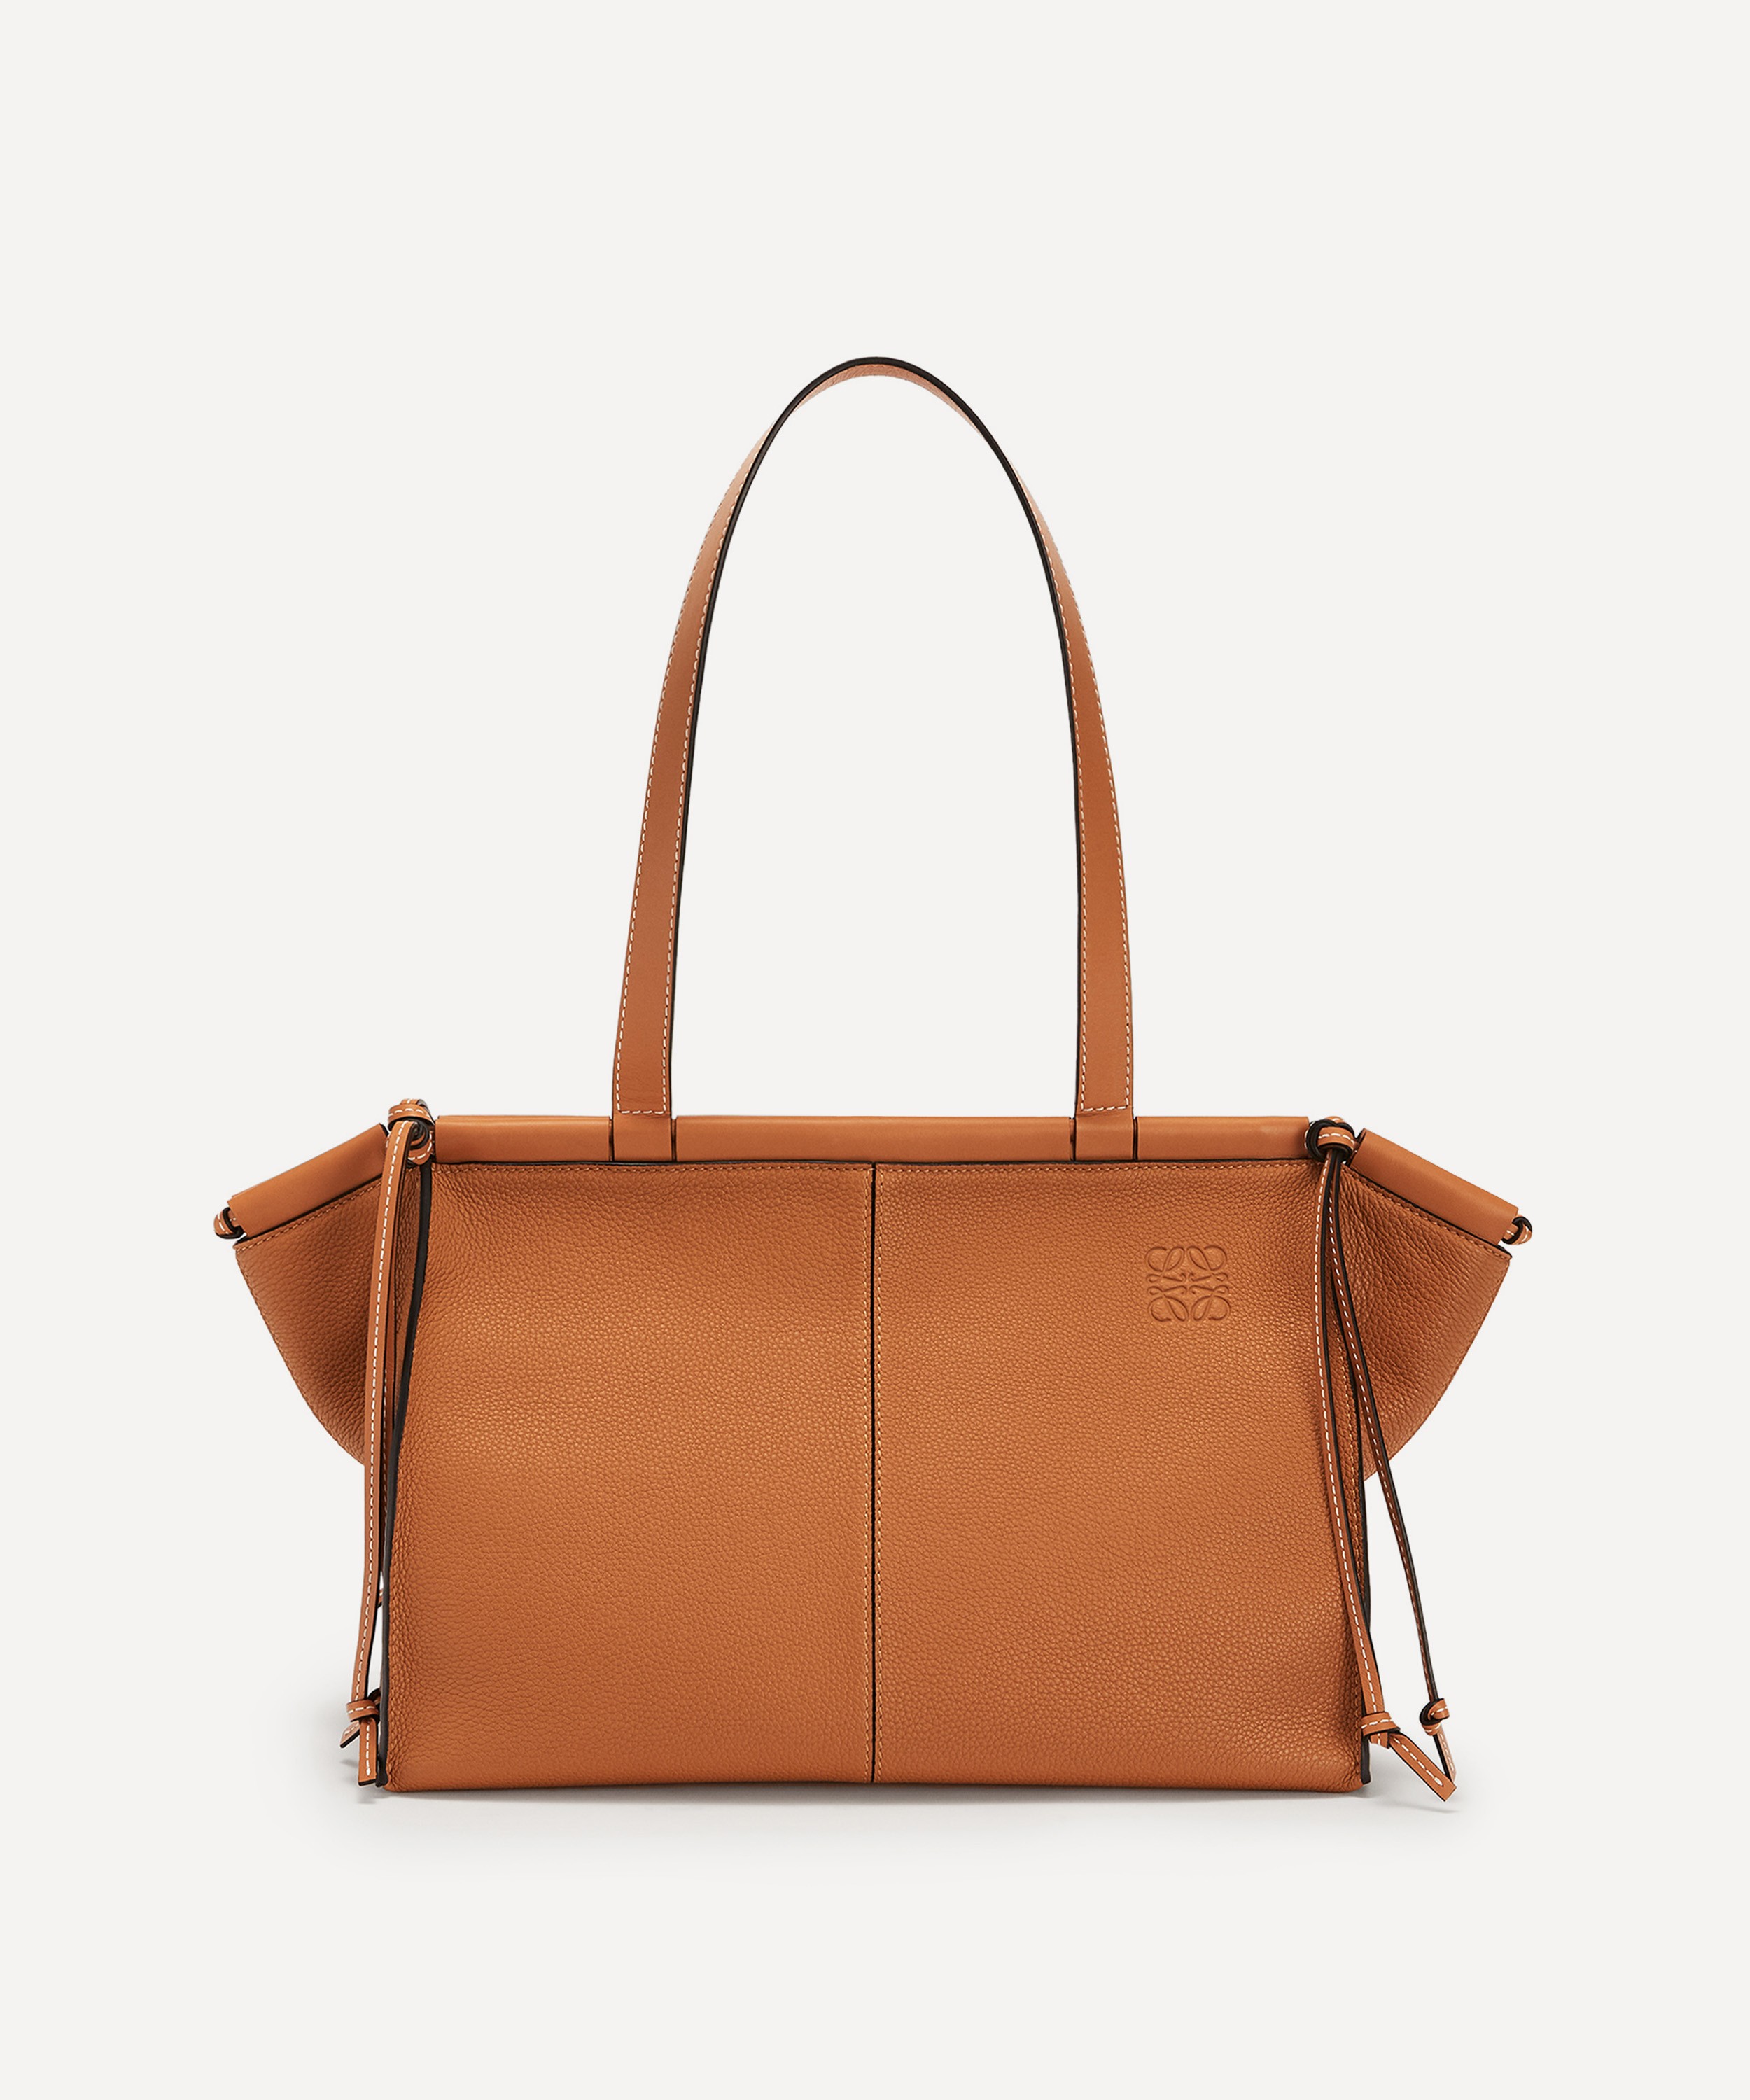 Loewe Cushion Small Canvas Tote Bag in Natural